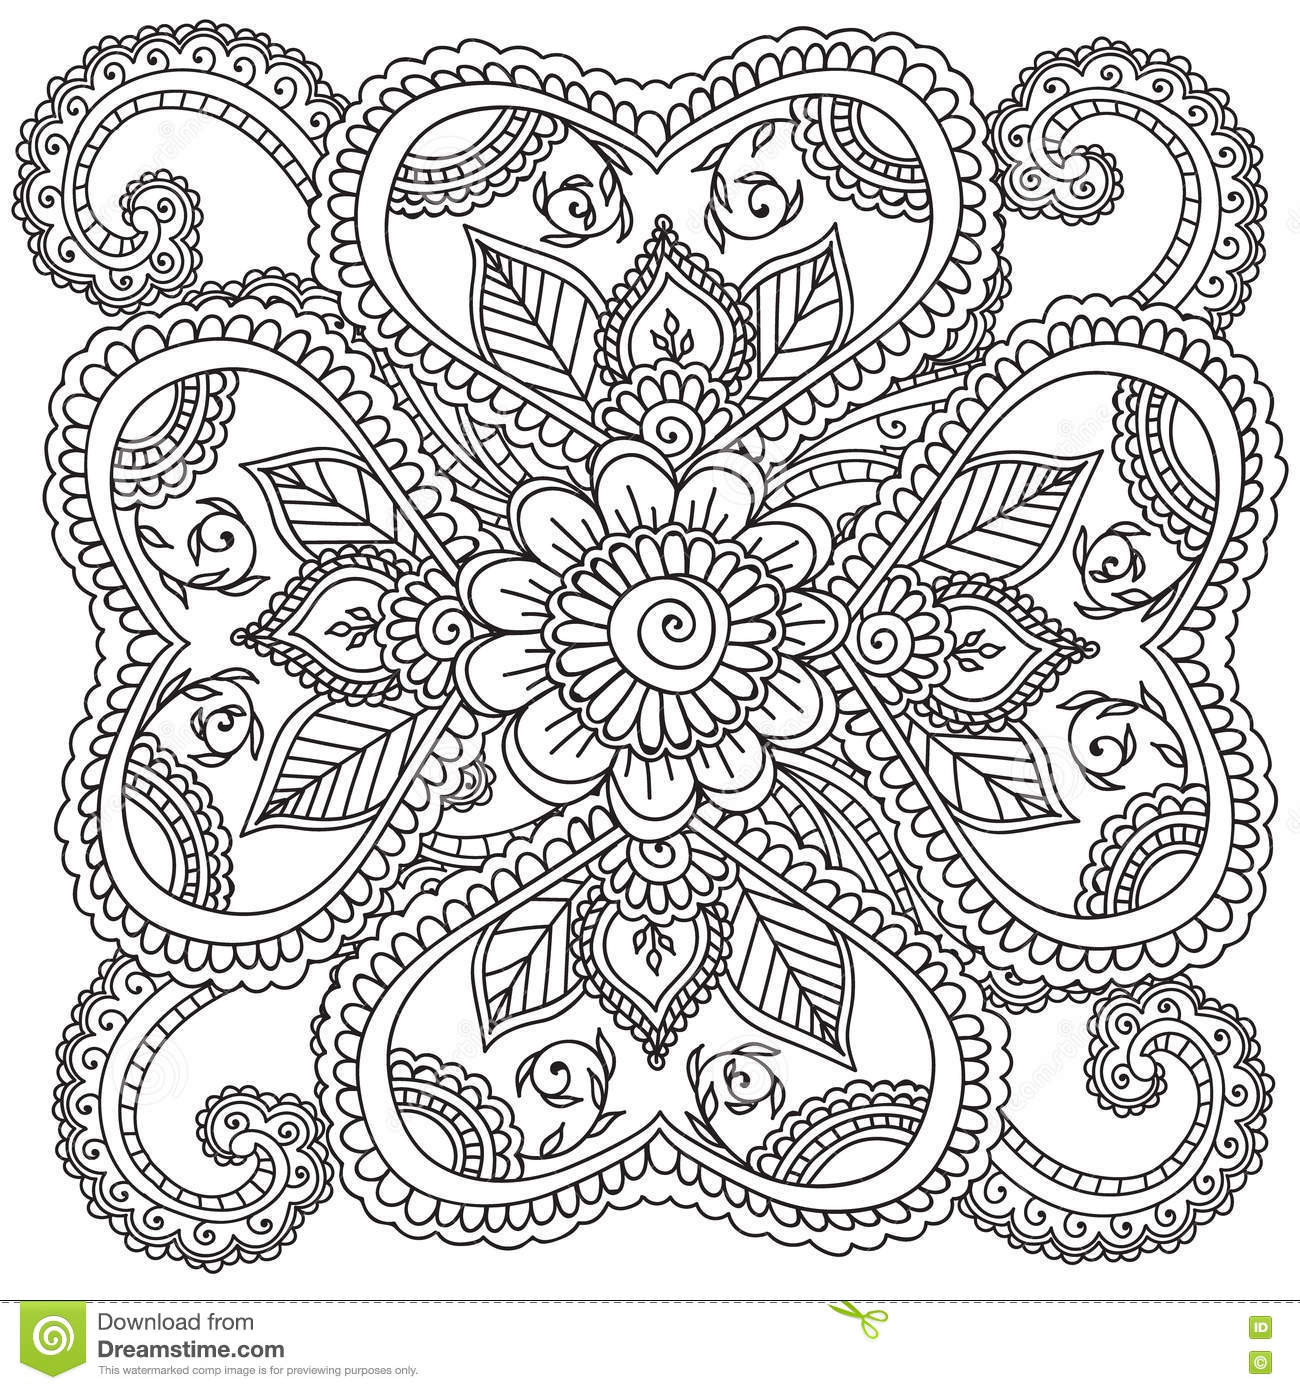 Coloring Pages For Adults Abstract Flowers
 38 Abstract Flower Coloring Pages Abstract Flower Design